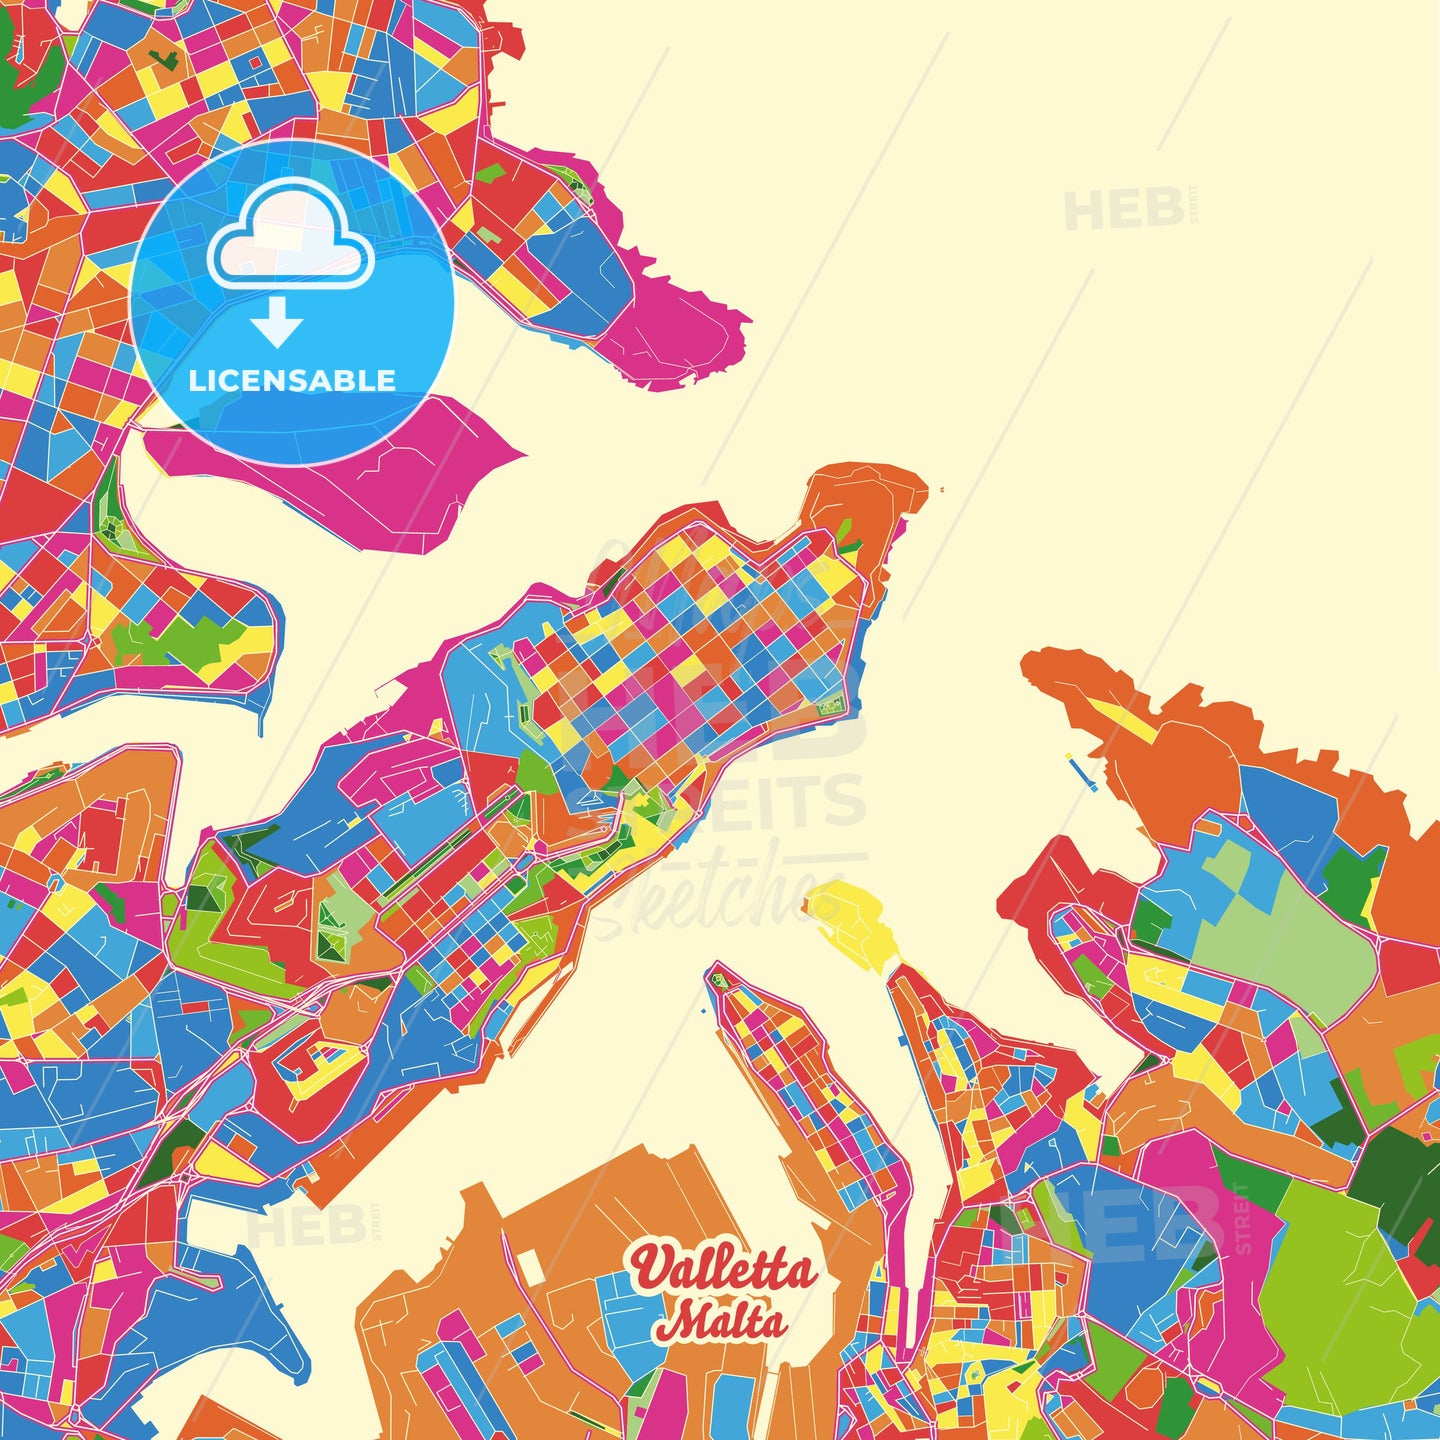 Valletta, Malta Crazy Colorful Street Map Poster Template - HEBSTREITS Sketches